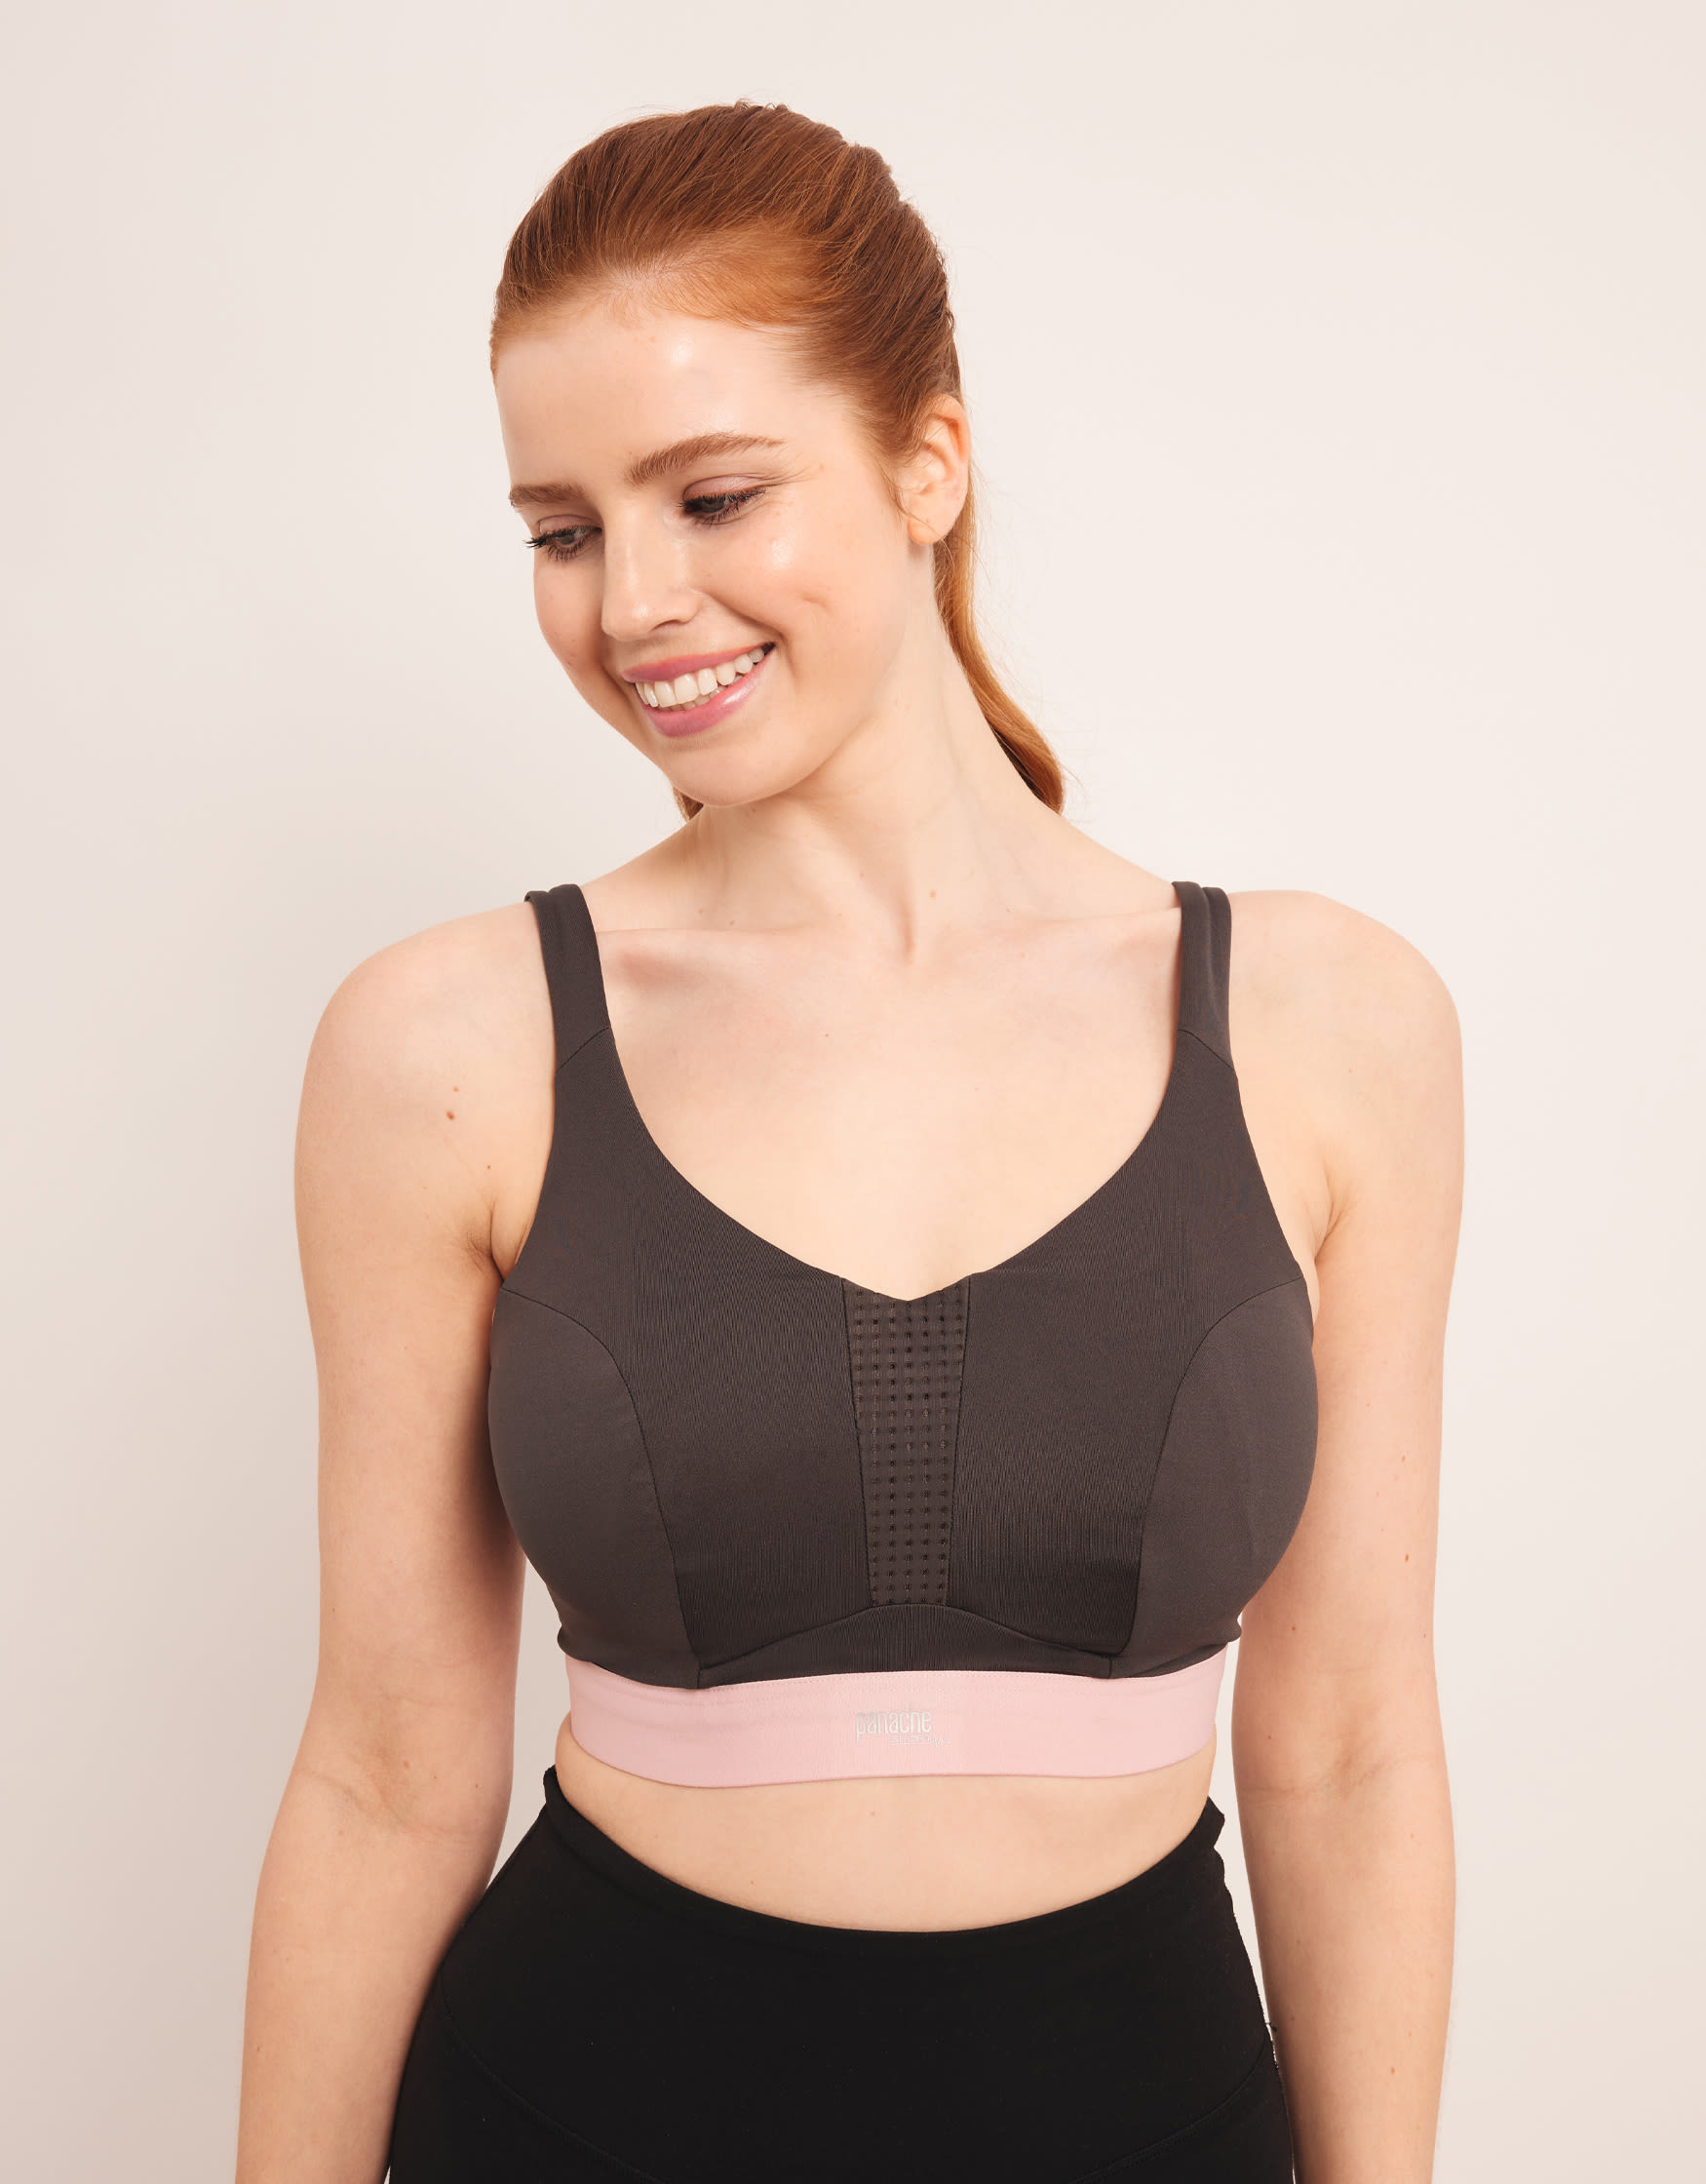 Panache Sports Bras in D cup and above